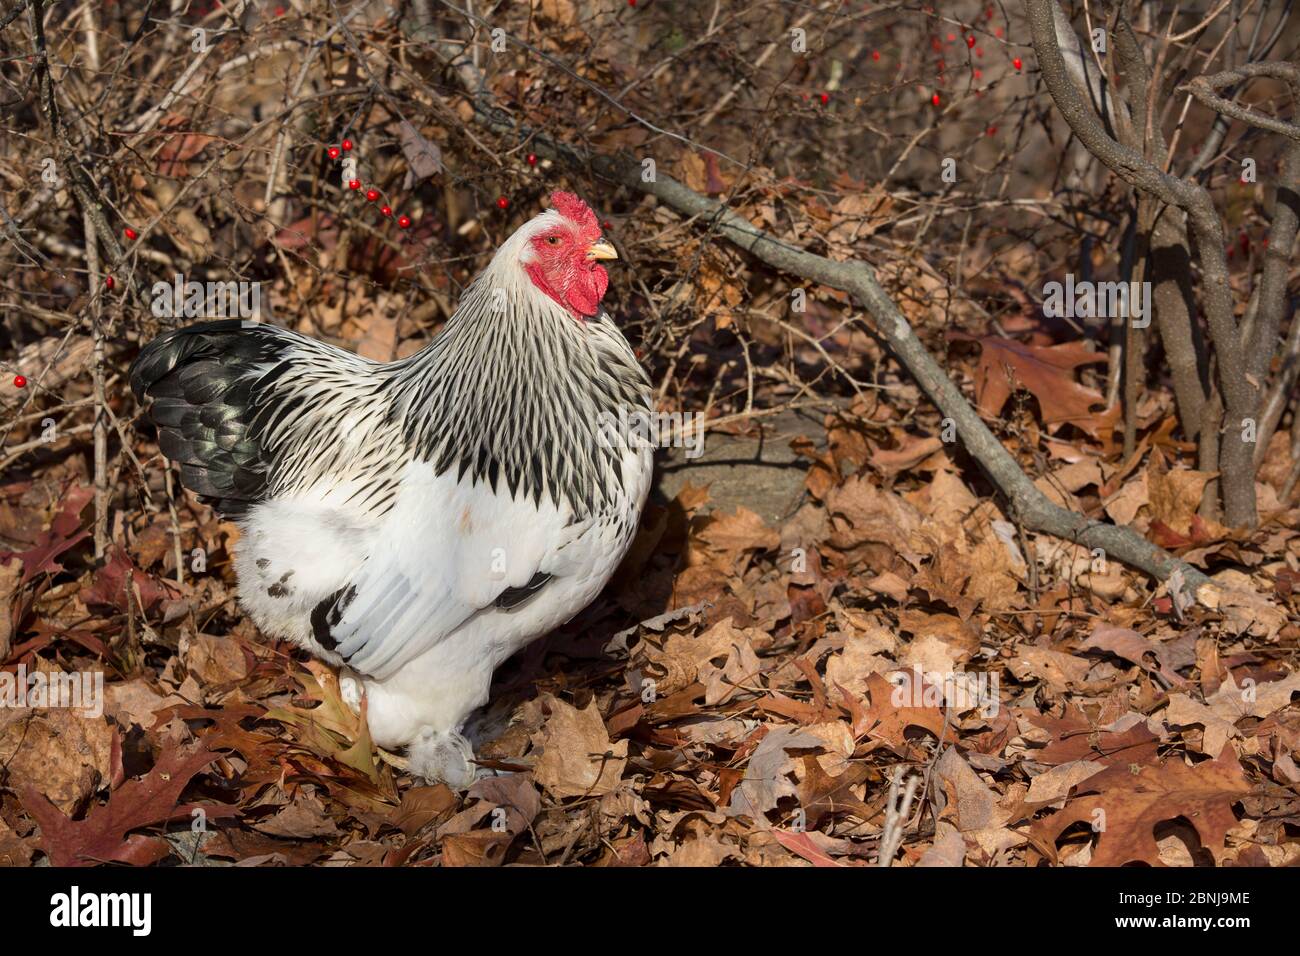 Silver-laced bantam Brahma rooster, Terryville, Connecticut, USA Stock  Photo - Alamy